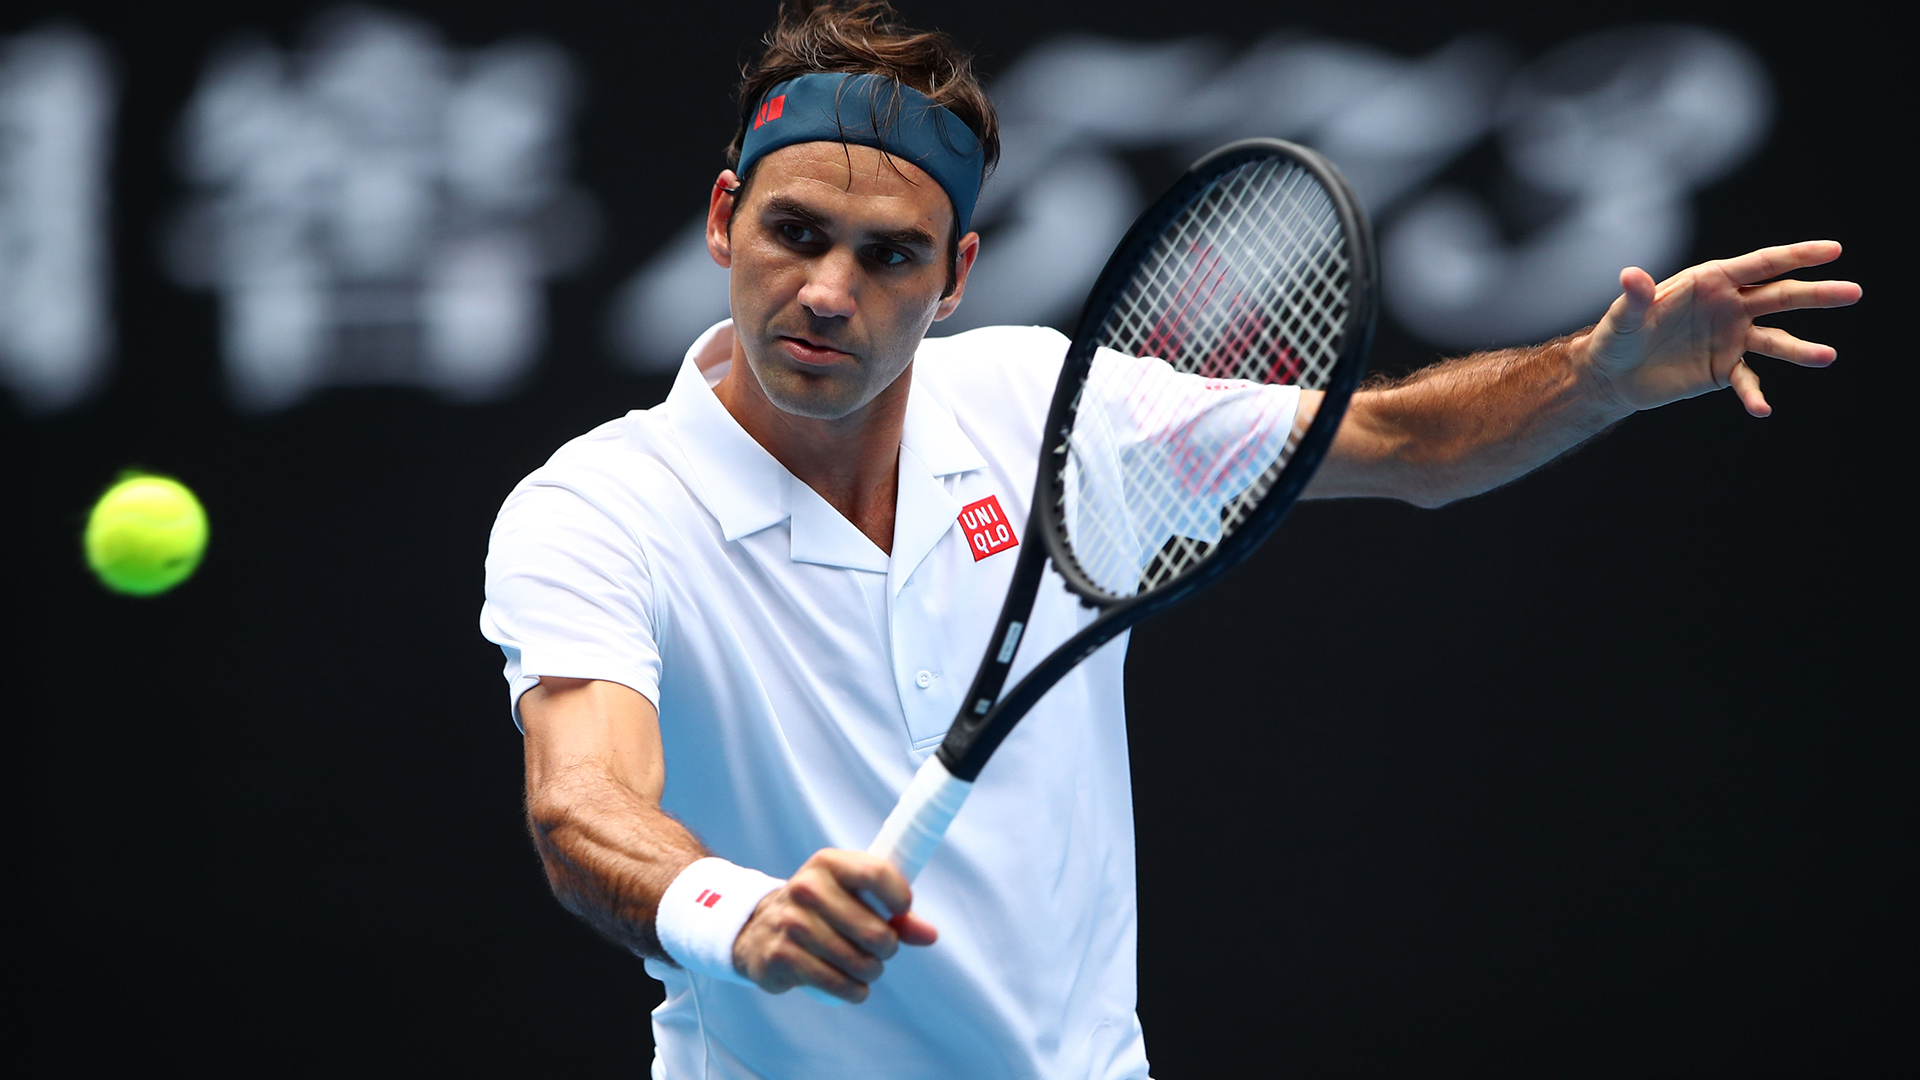 Roger Federer overcame Dan Evans to move into the Australian Open third round.